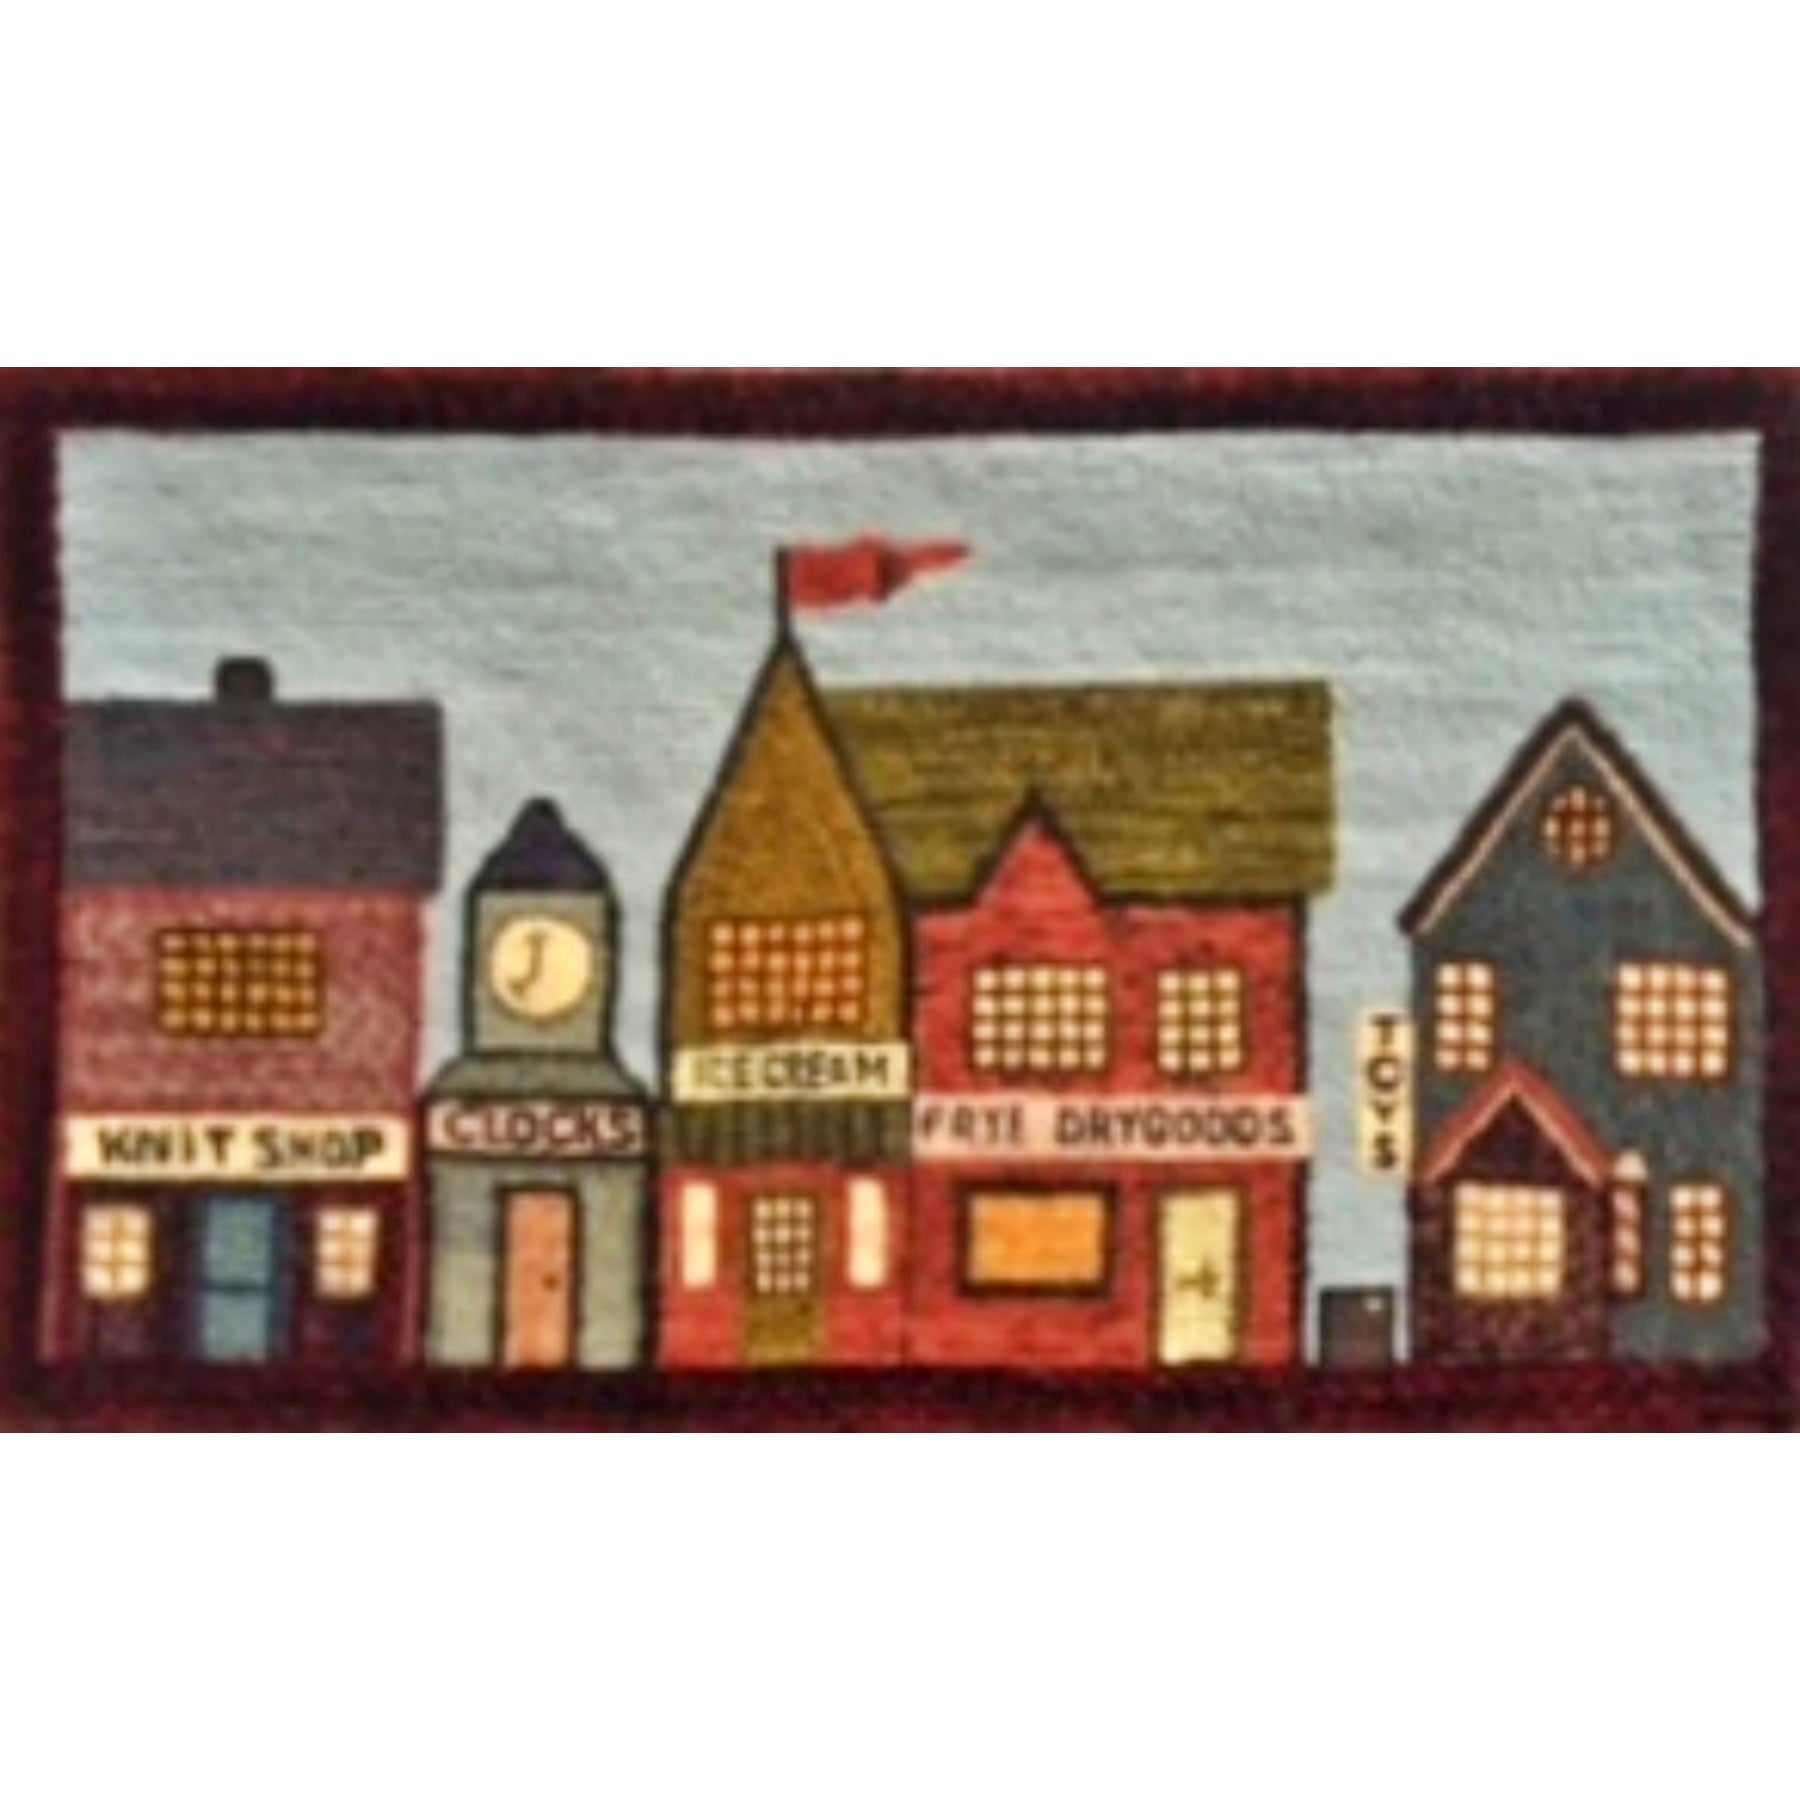 Hometown USA, rug hooked by Mary Williamson & Sandy Meyers